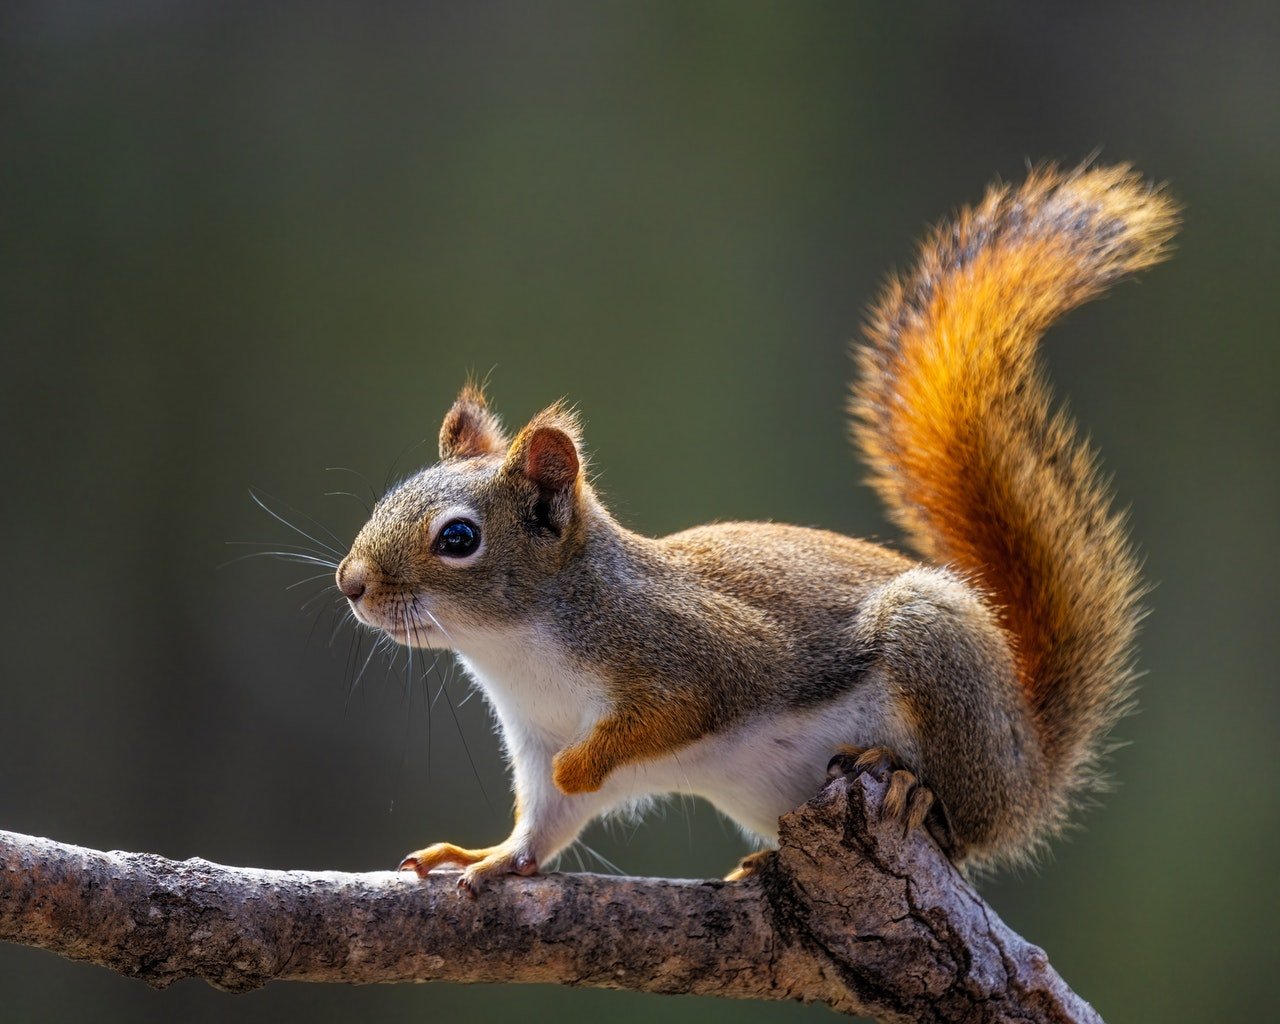 The squirrels crawled up the boy's pants! | Photo: Pexels 